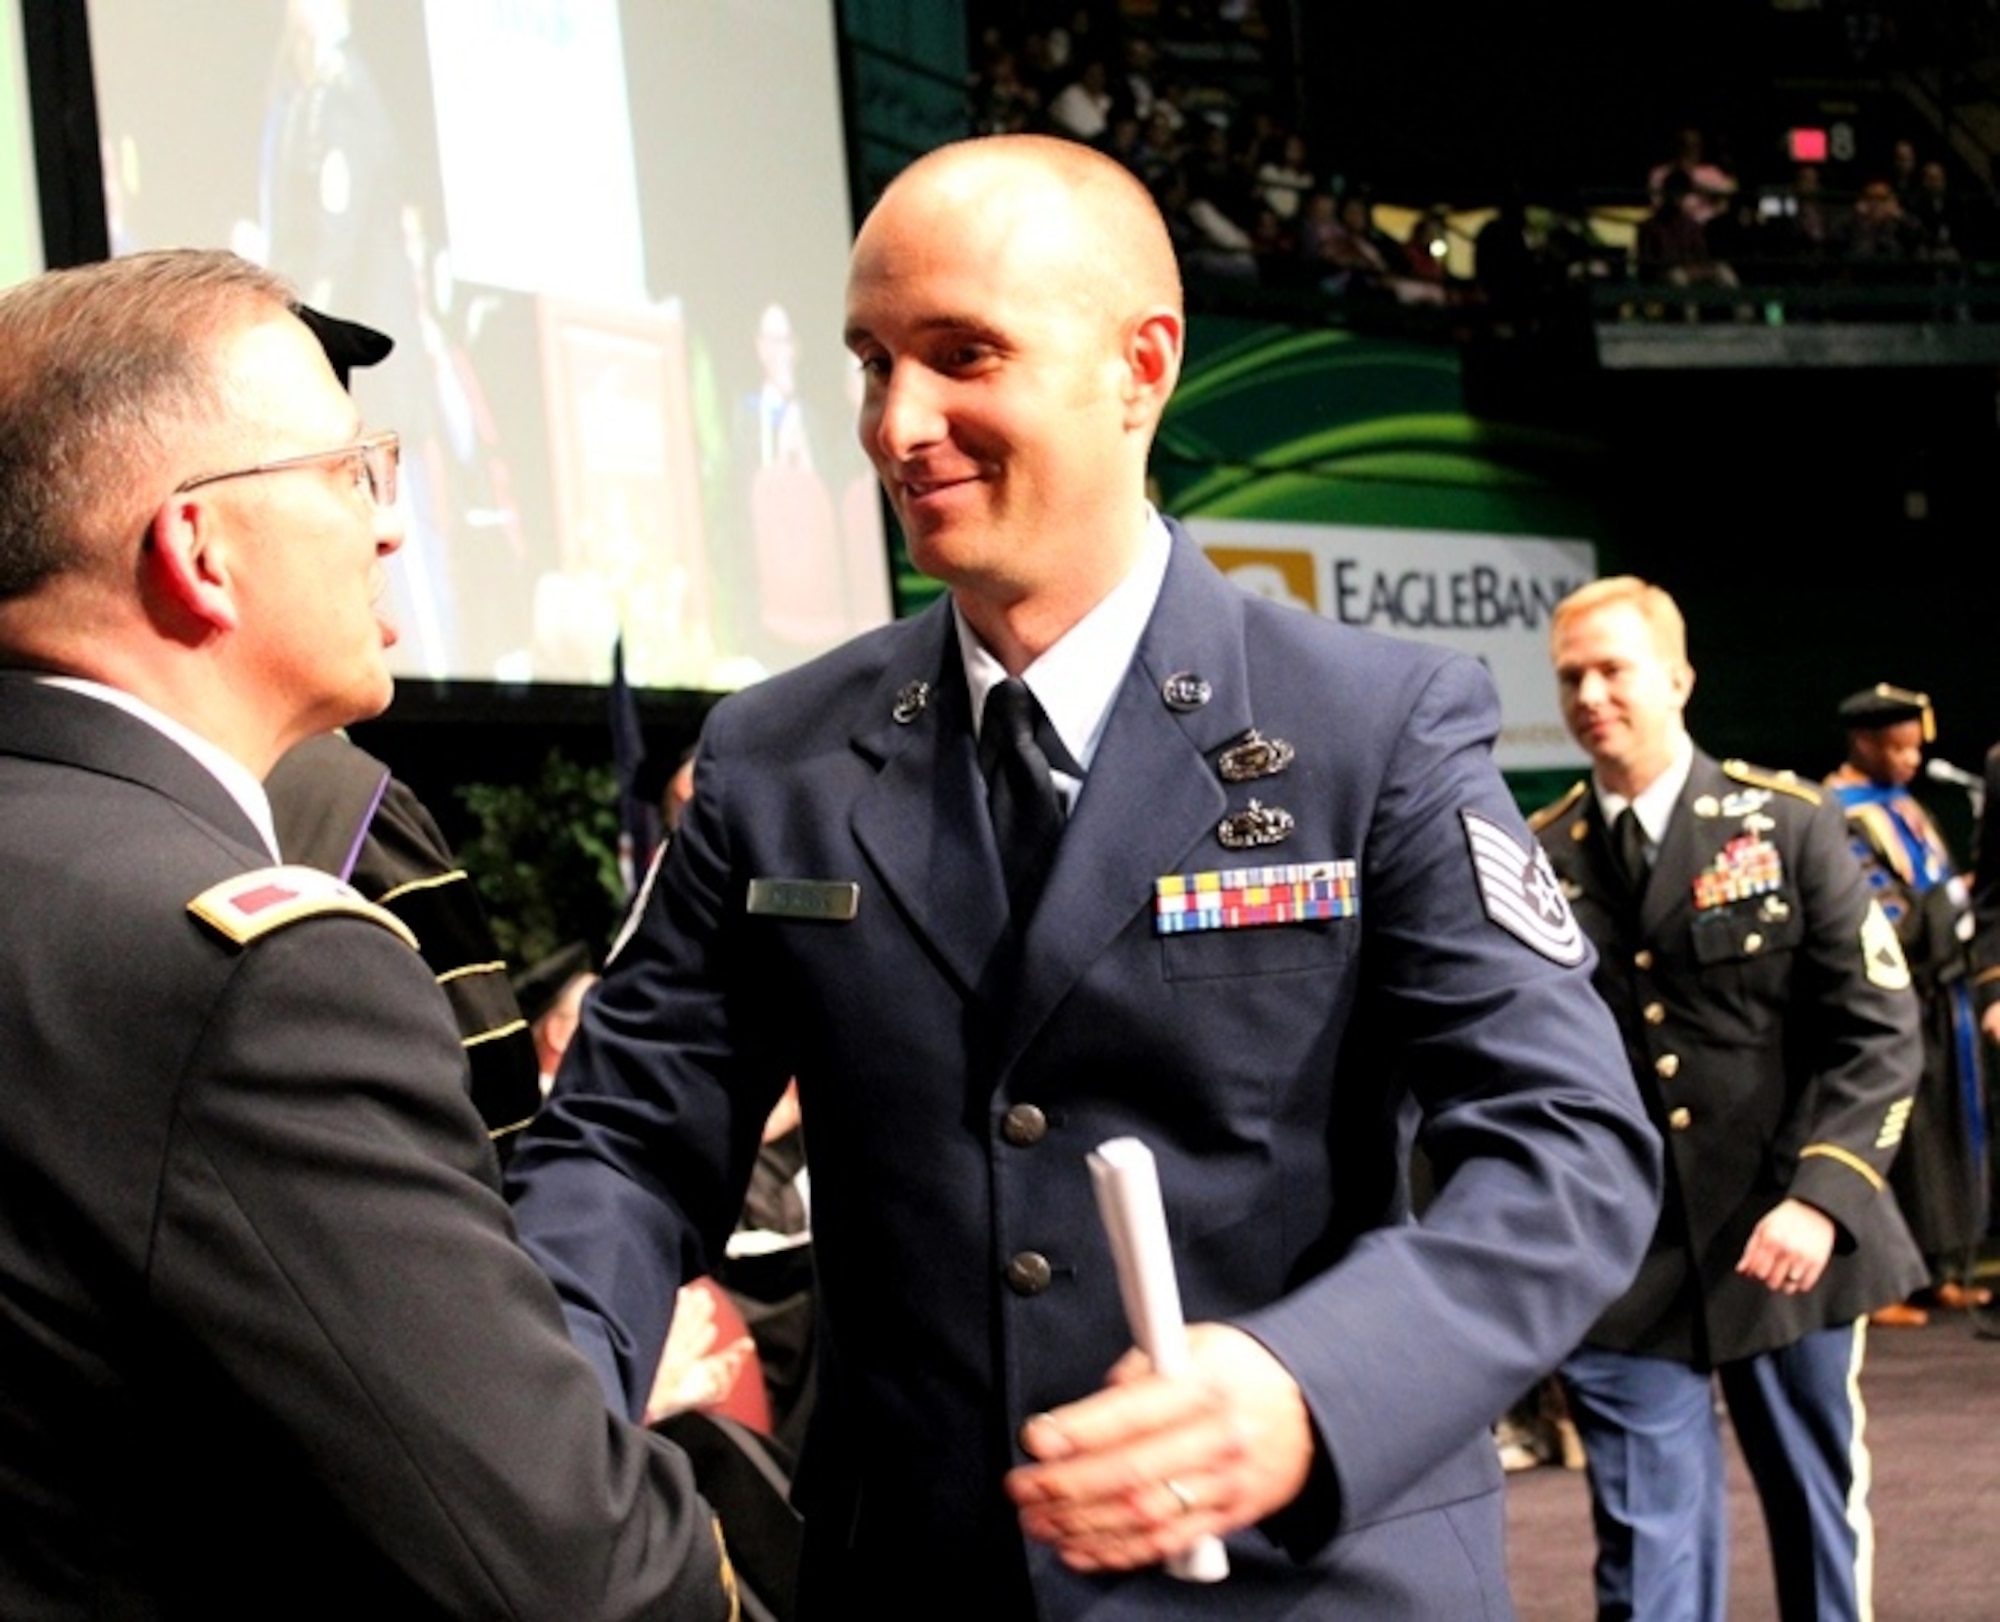 Tech. Sgt. Joe Merfeld crosses the stage at a commencement ceremony held at George Mason University on May 11, 2016, as he graduates from the Enlisted to Medical Degree Preparatory Program. The Enlisted to Medical Degree Preparatory Program is a partnership between the Armed Services and Uniformed Services University. Designed for enlisted service members, the two-year program enables members to remain on active duty status while enrolled as full-time students in preparation for application to medical school. (U.S. Air Force photo by Prerana Korpe, AFMS Public Affairs)